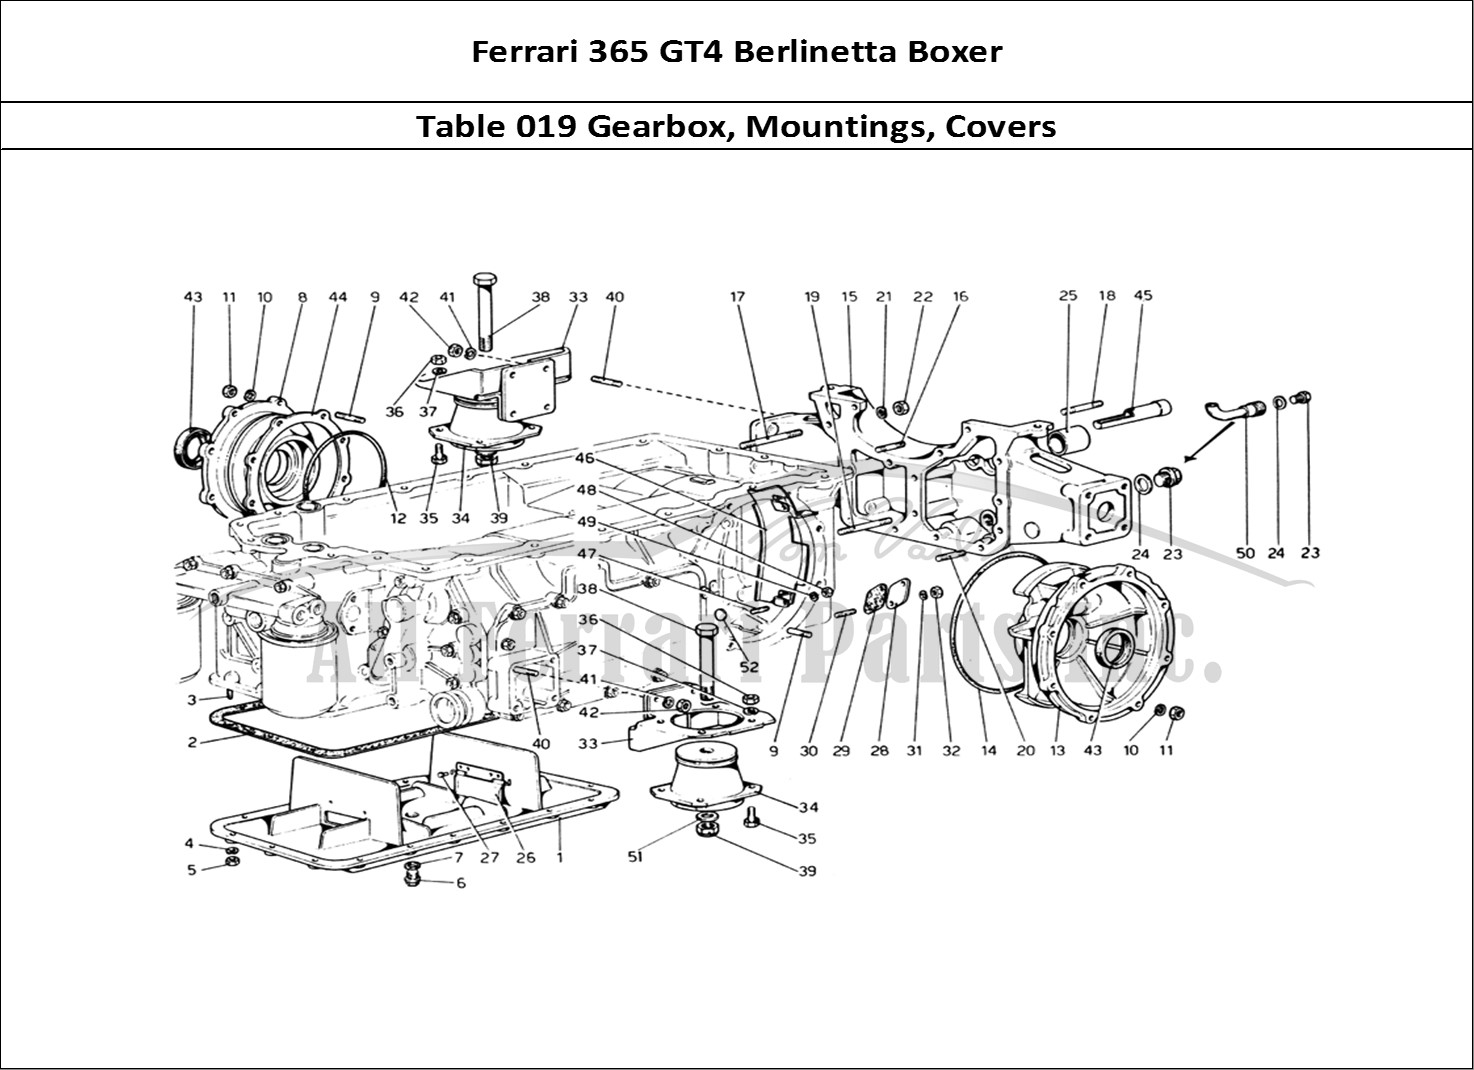 Ferrari Parts Ferrari 365 GT4 Berlinetta Boxer Page 019 Gearbox - Mountings and C